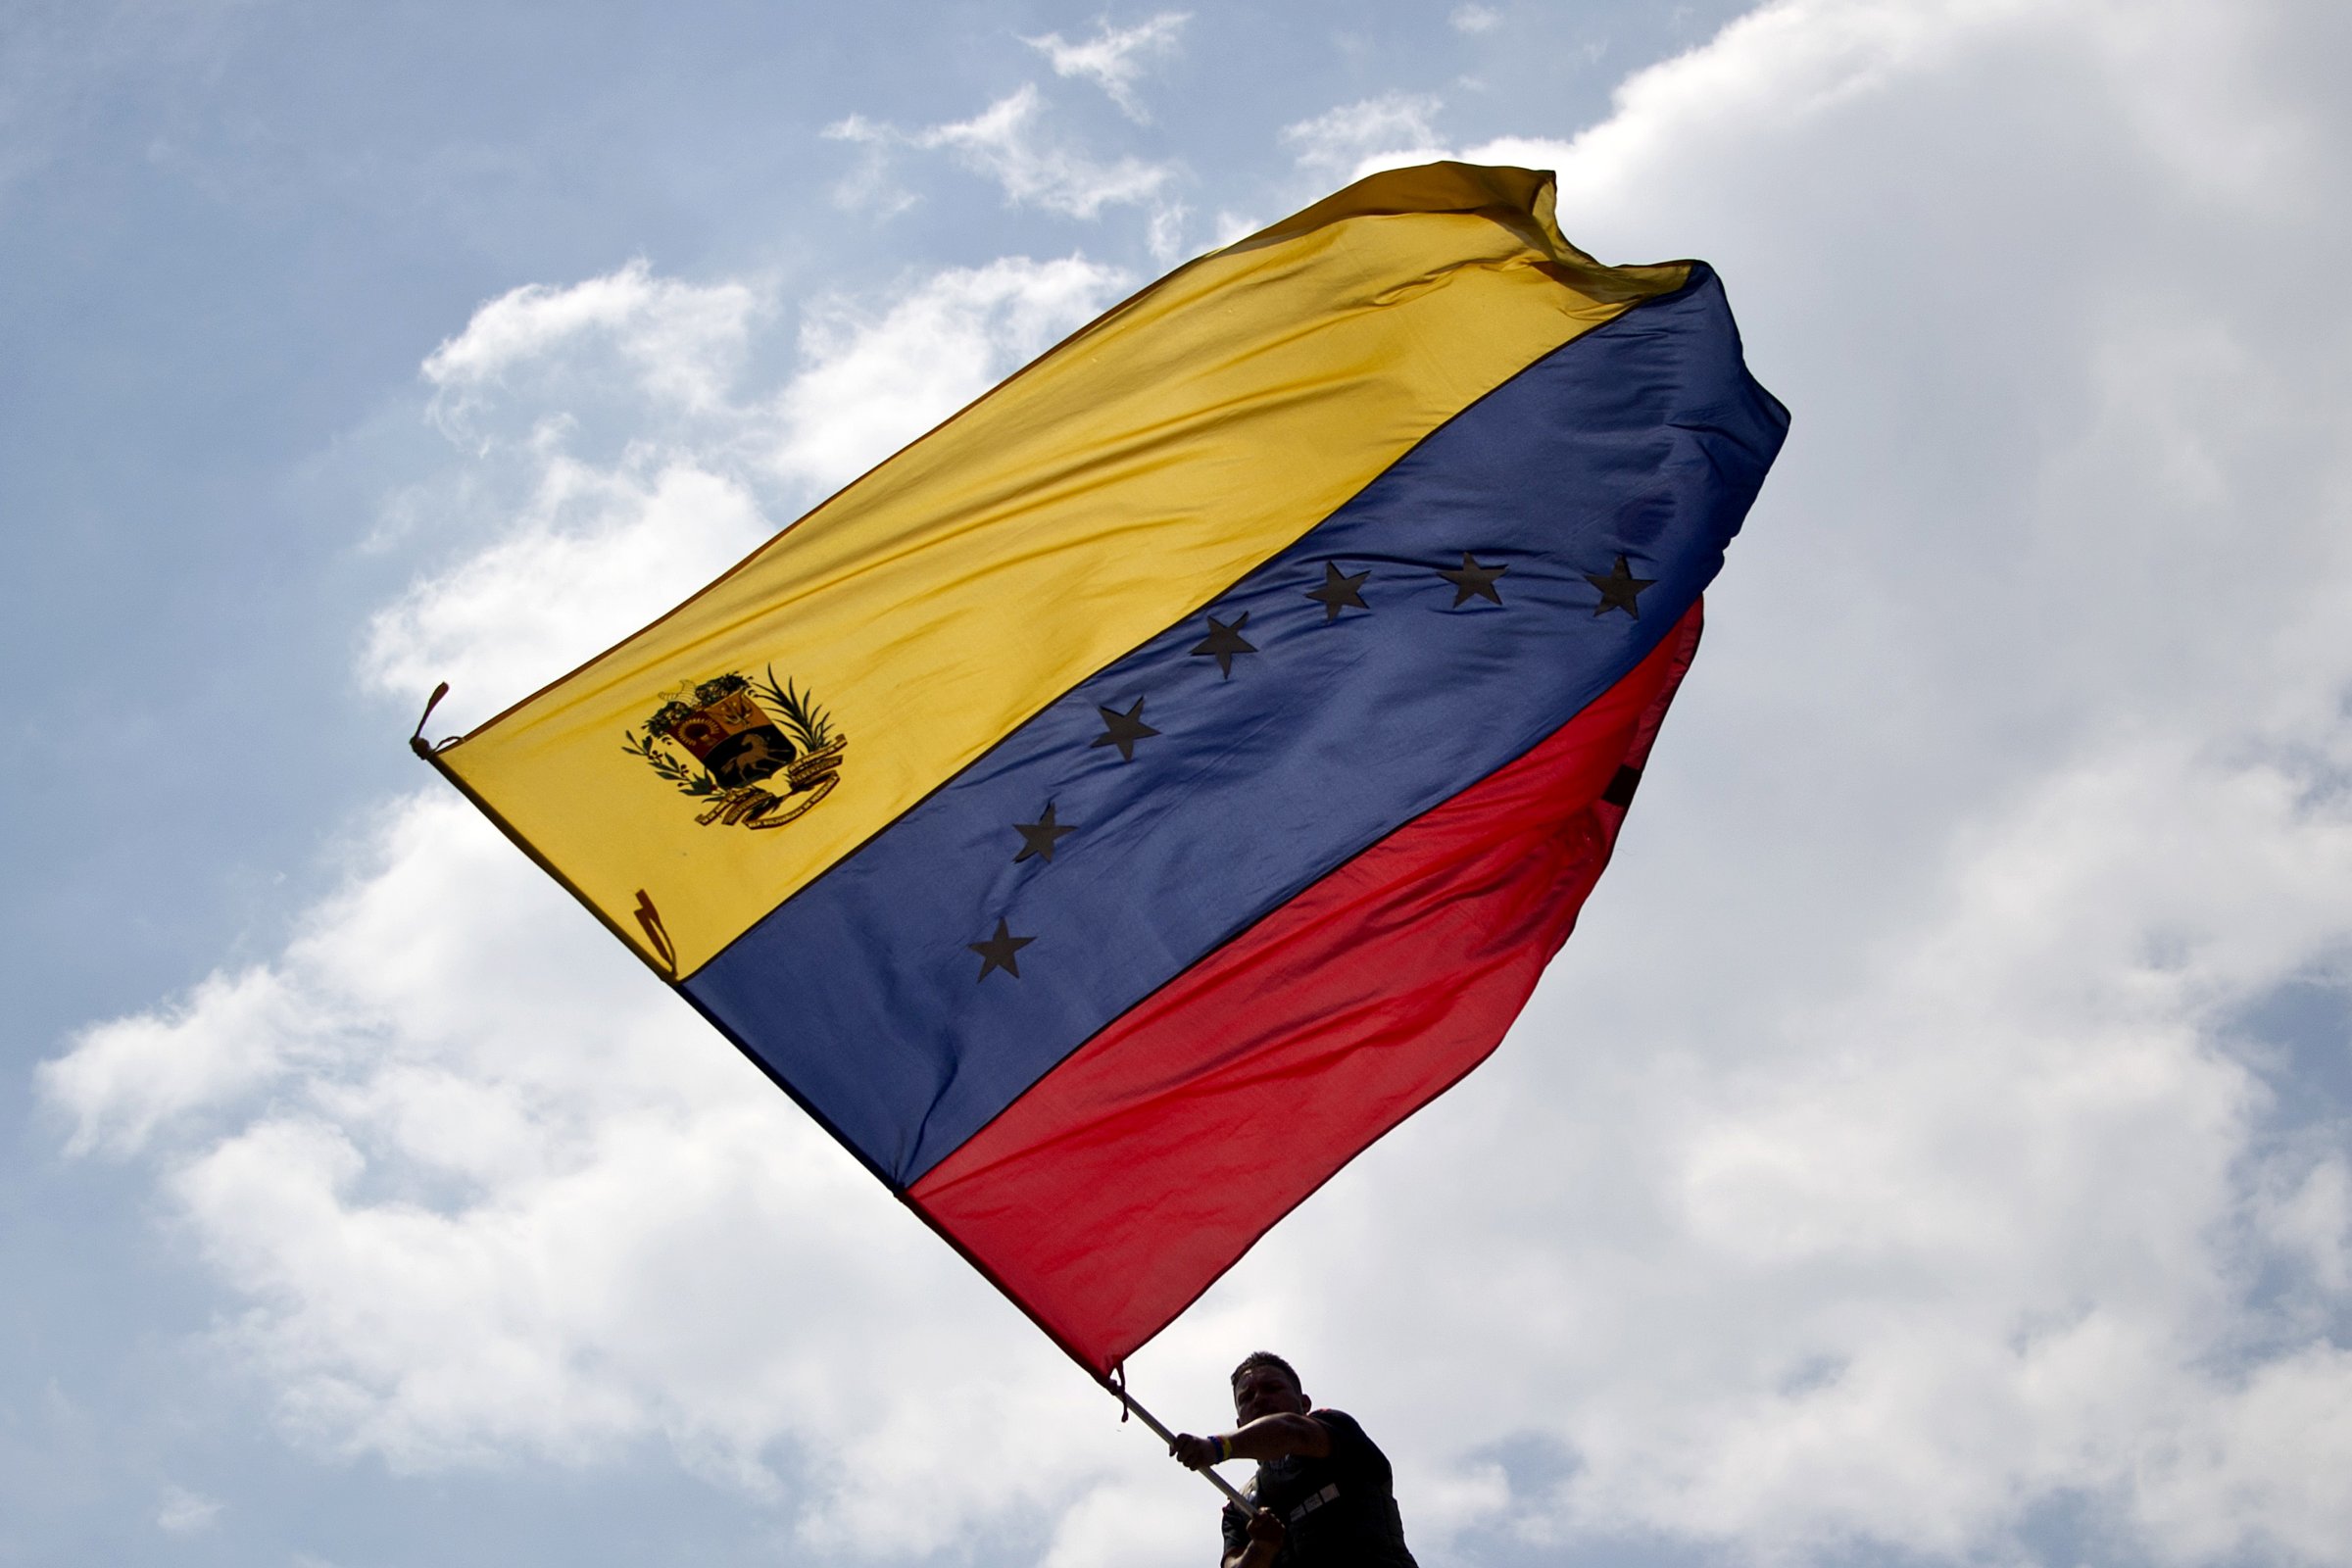 A man waves a Venezuelan flag during a protest against the government of President Nicolas Maduro in San Cristobal, Venezuela, on Feb. 22, 2014.